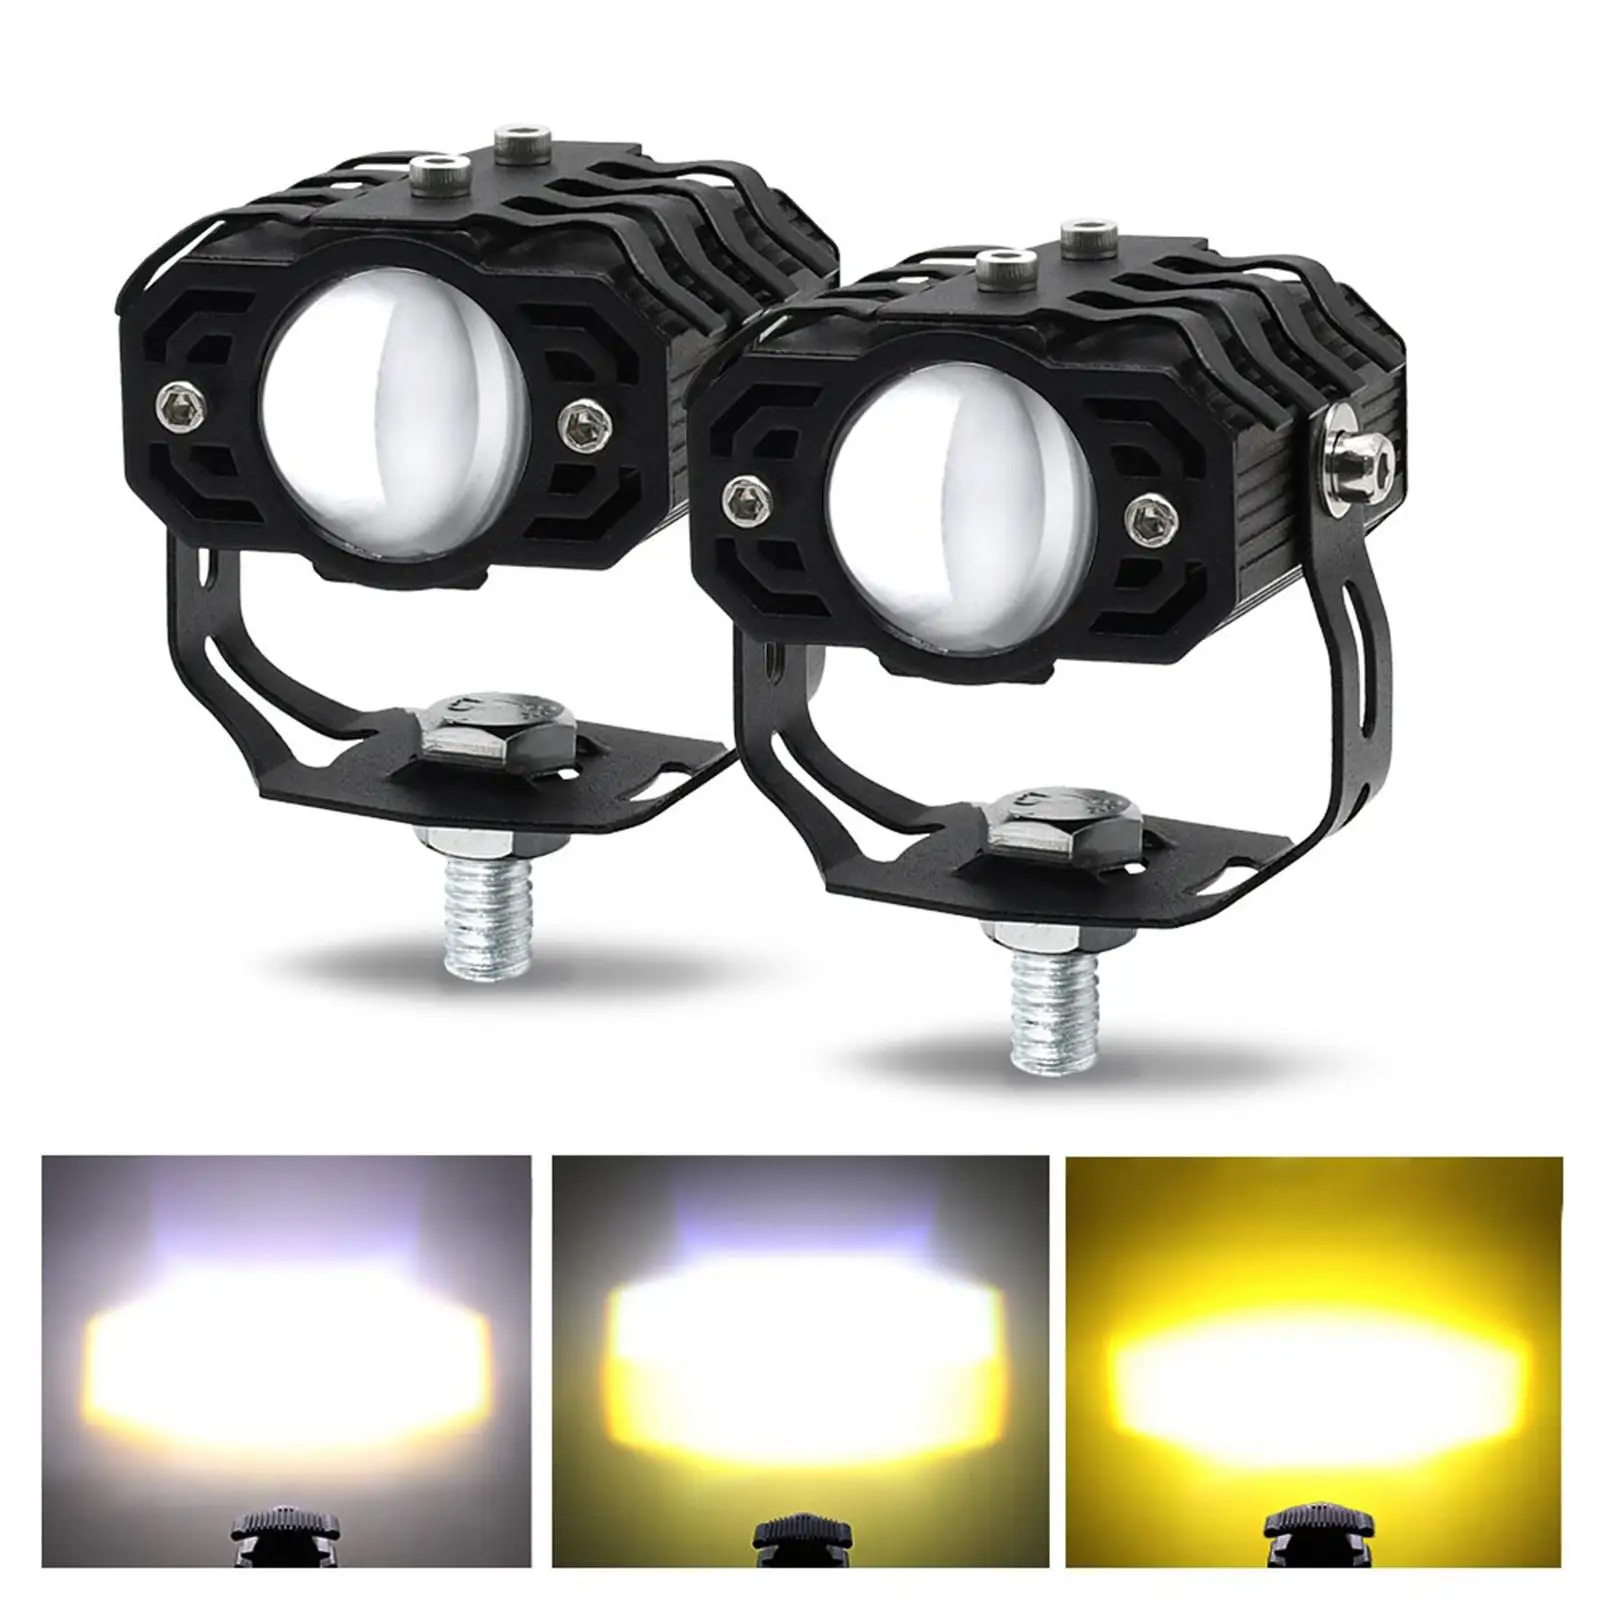 2x Motorcycle Auxiliary Driving Lights Spotlight Universal for Boat